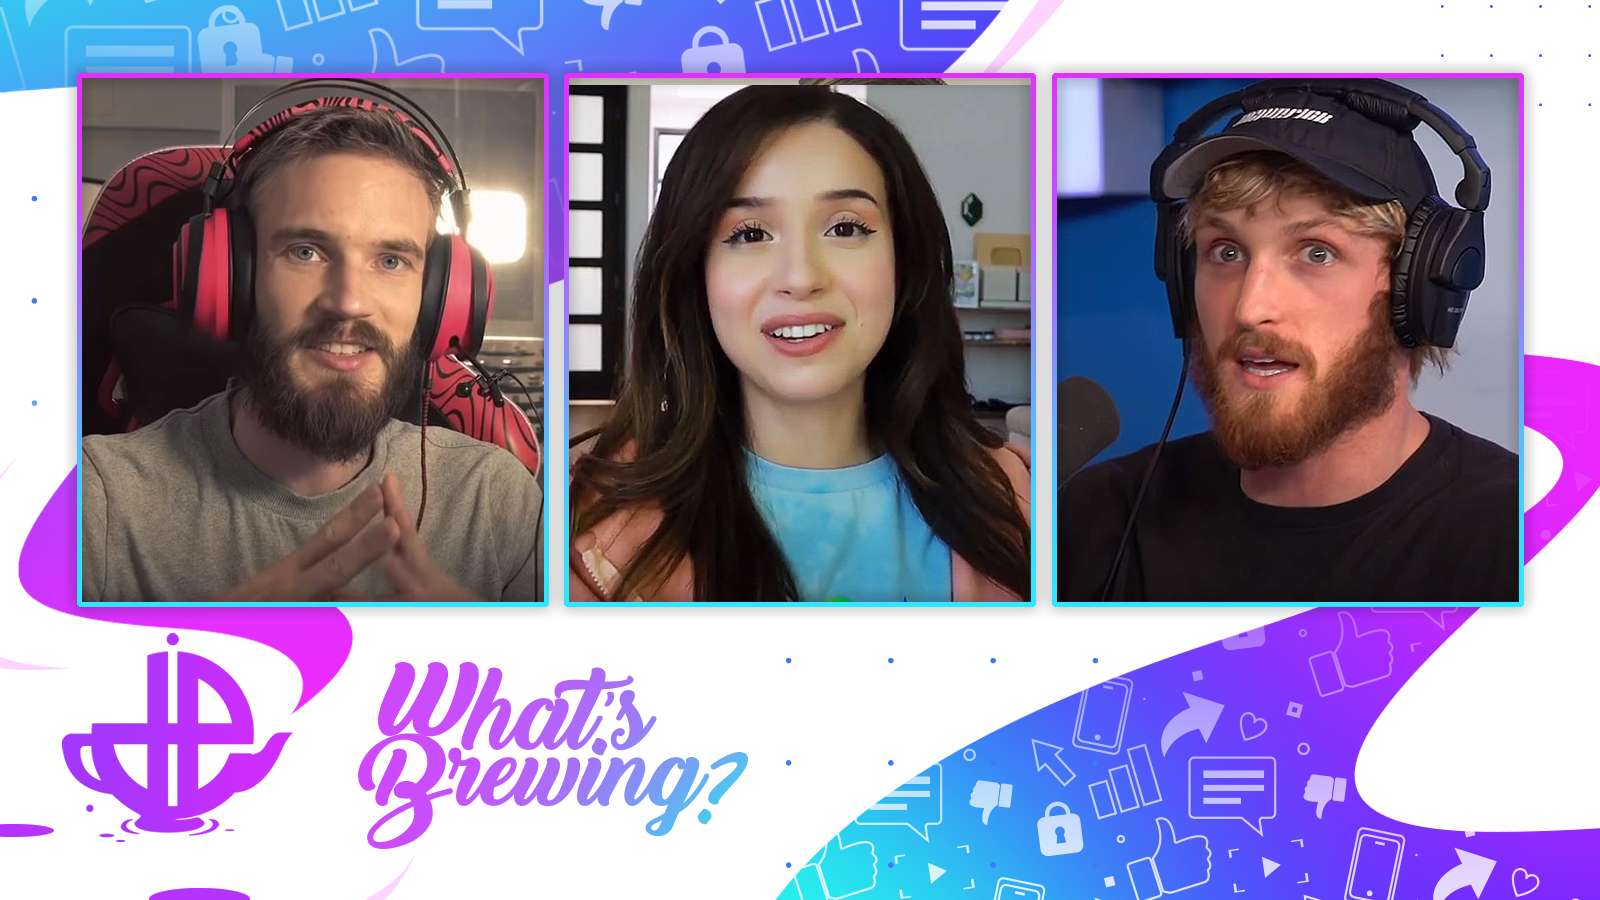 PewDiePie, Pokimane and Logan Paul sit side by side on the What's Brewing logo.